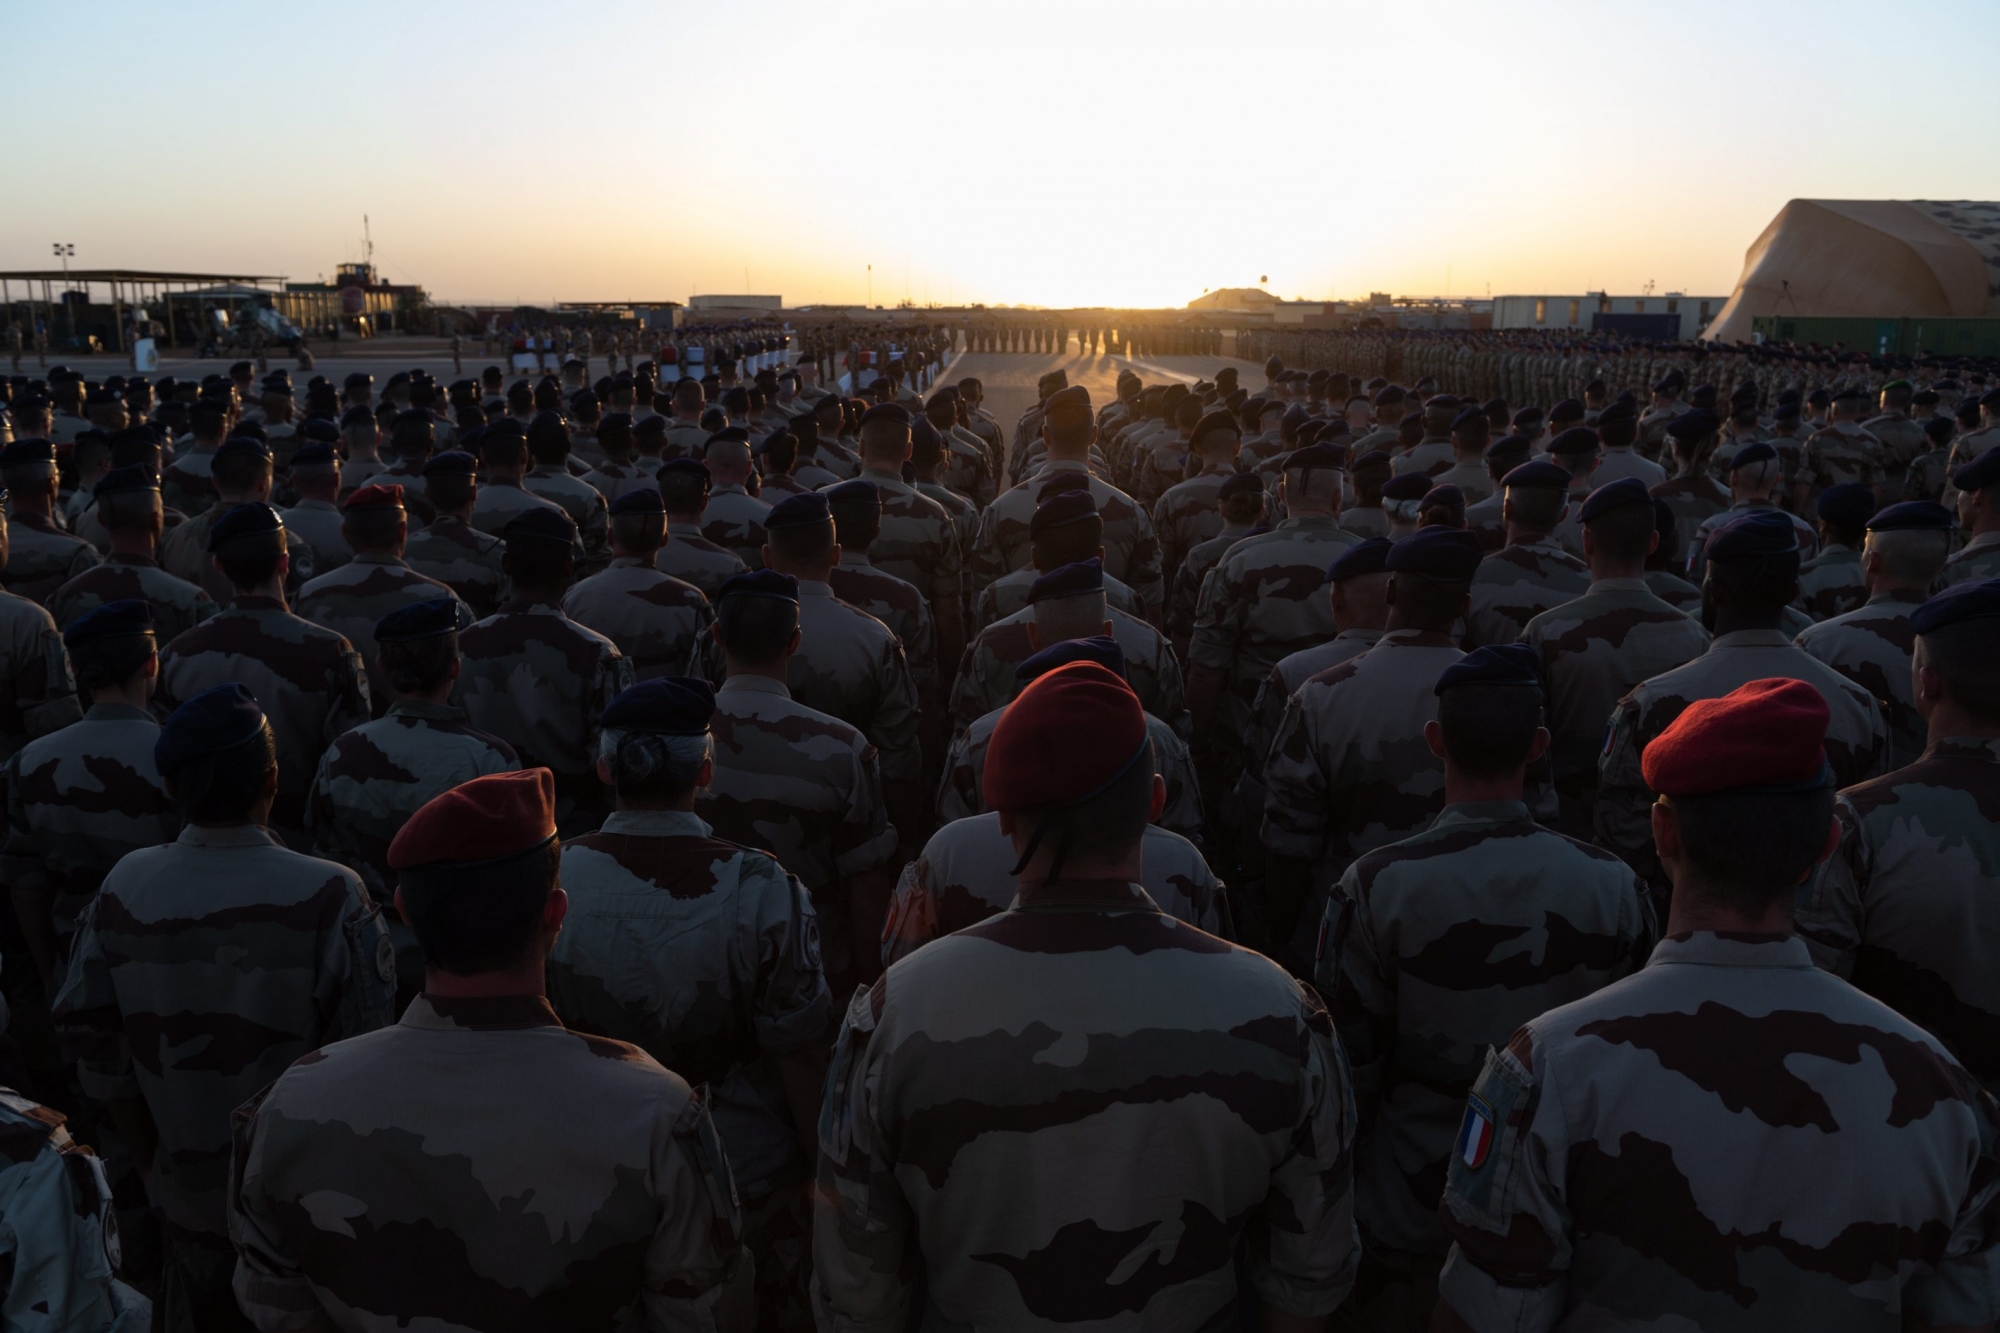 epa08037026 A handout photo made available by French Defense Communication and Audiovisual Department (ECPAD) shows French soldiers paying their respects as coffins are transported by plane to France for a funeral ceremony, at a military base in Gao, Mali, 30 November 2019. (issued 01 December 2019). Thirteen French soldiers have died in an accident involving two helicopters during the Barkhane operation against jihadists in Mali on 25 November. A national tribute will be paid on 02 December at the Hotel National des Invalides in Paris. EPA/THOMAS PAUDELEUX HANDOUT HANDOUT EDITORIAL USE ONLY/NO SALES MALI FRANCE ARMY ACCIDENT